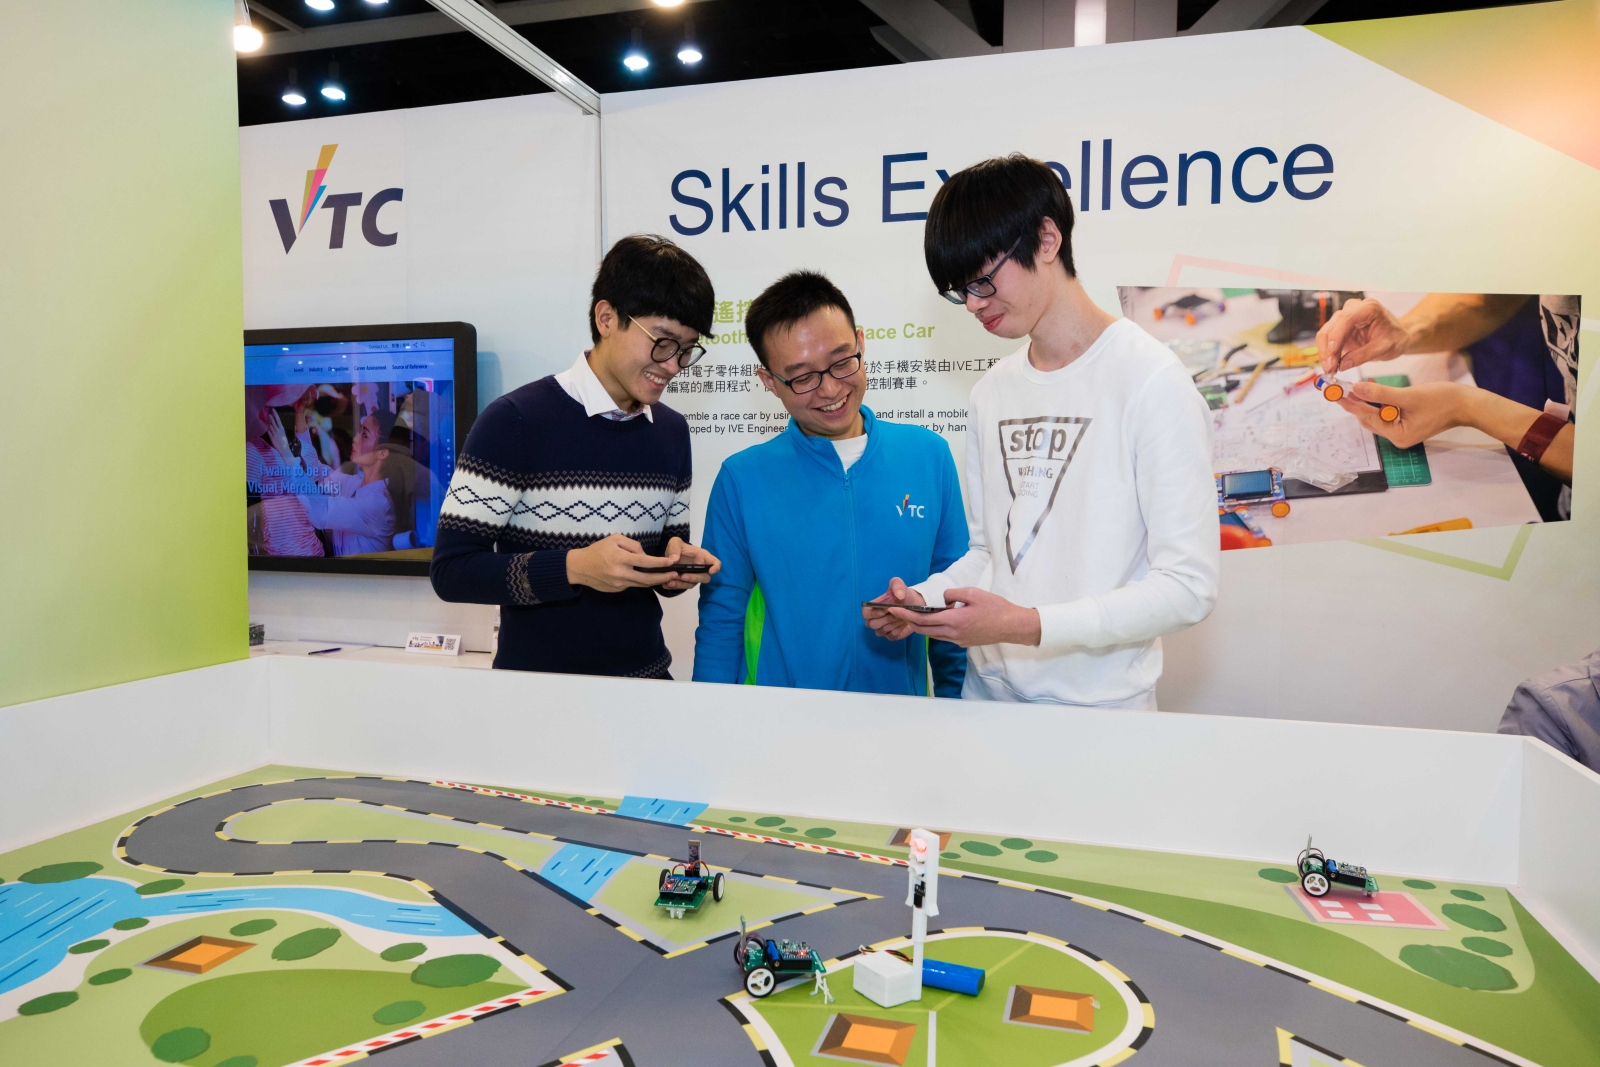 The Skills Excellence Zone allows visitors to assemble by hand a Bluetooth-controlled race car and operate it from a distance through hand movements or voice, with the aid of an app developed by students and teachers of IVE’s Engineering Discipline